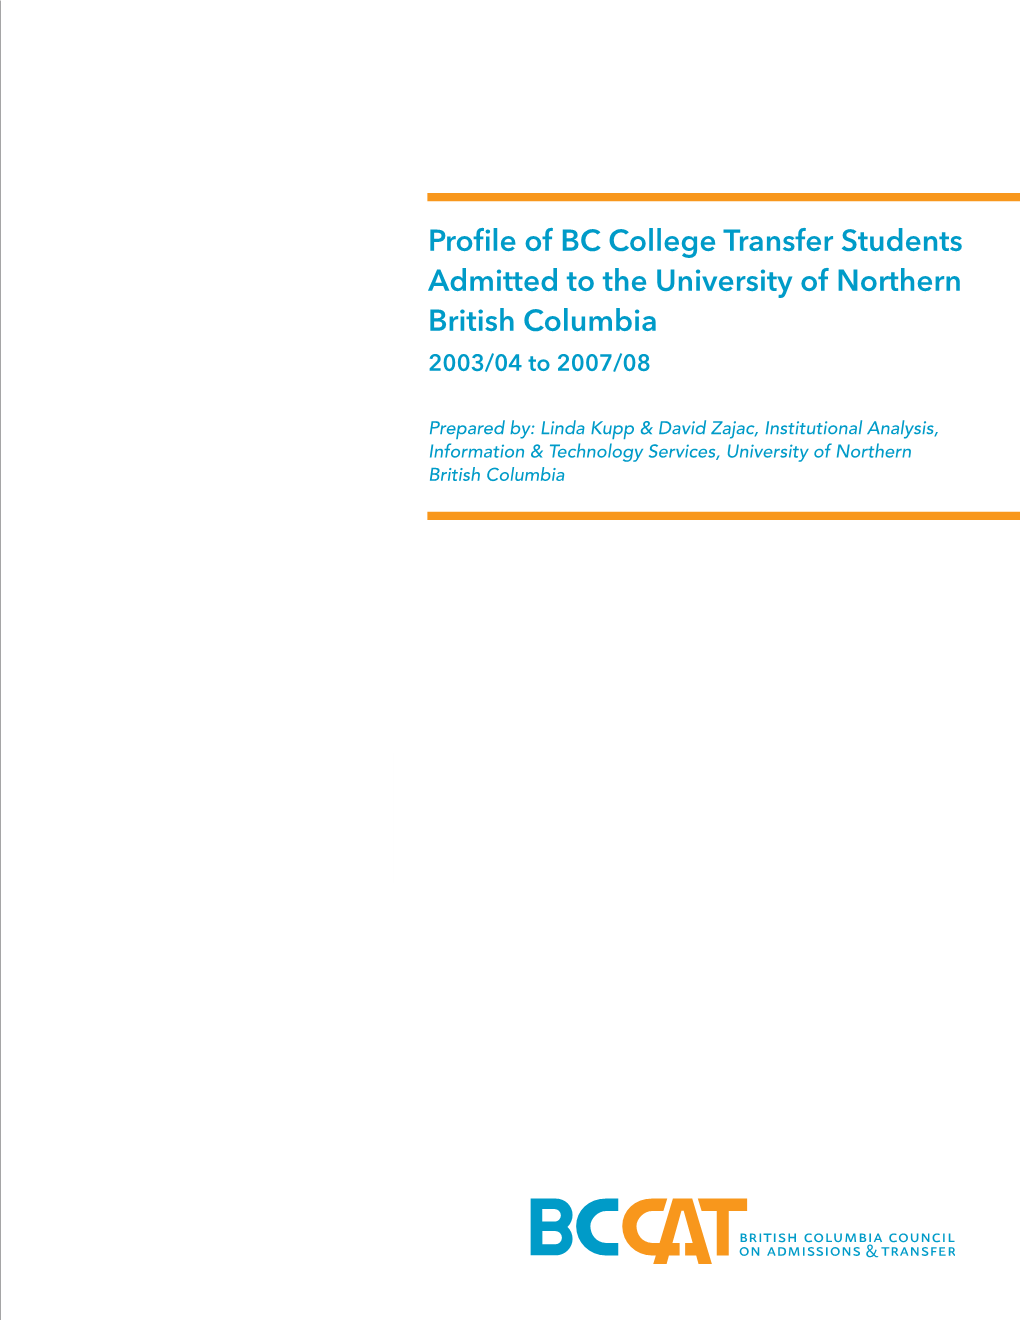 Profile of BC College Transfer Students Admitted to the University of Northern British Columbia 2003/04 to 2007/08